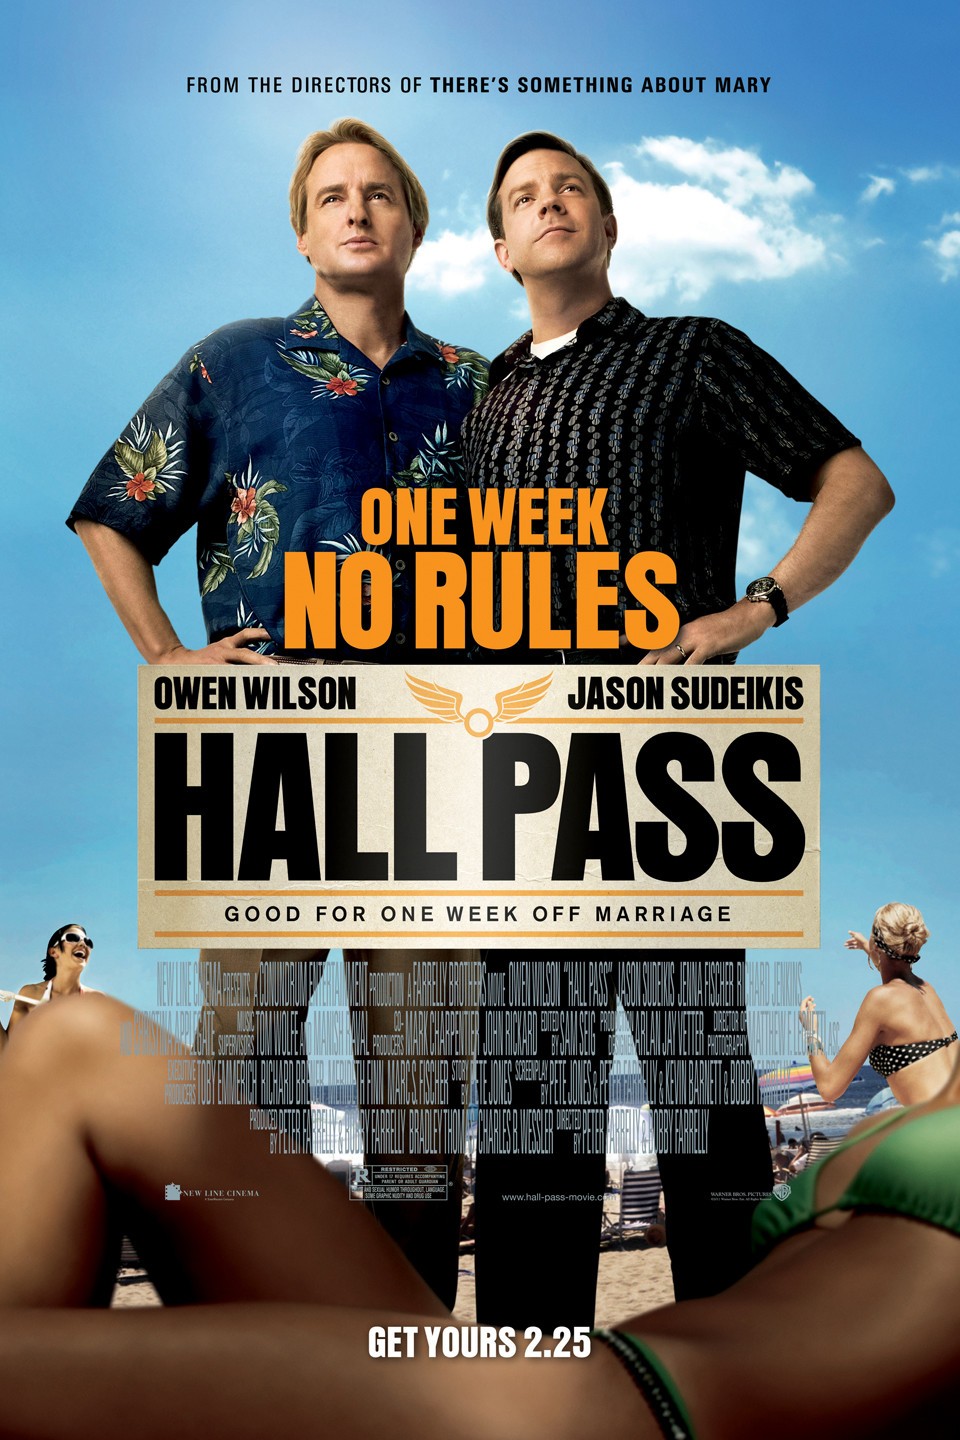 cheryl swales share college rules hall pass photos